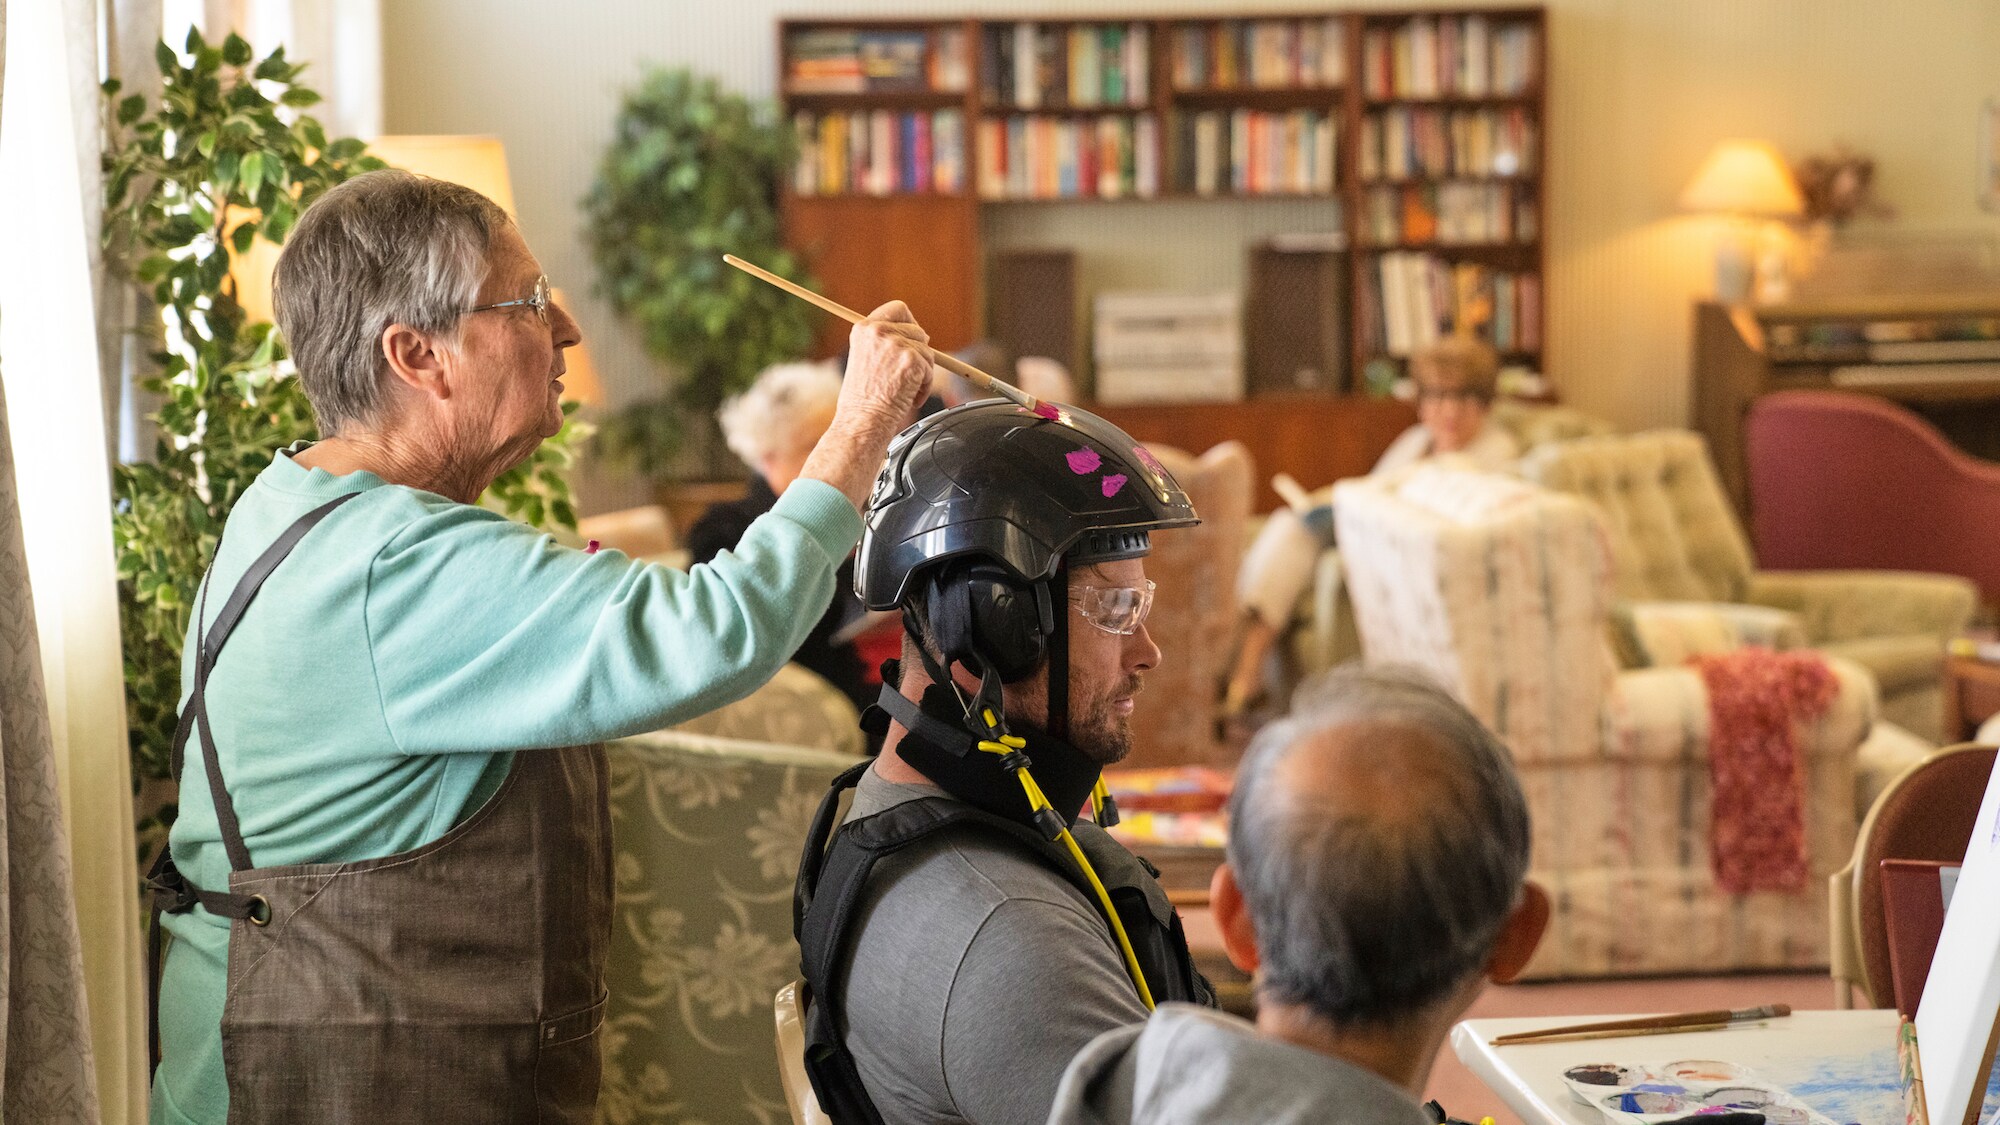 Chris Hemsworth takes part in an art class with other residents. One resident paints a rally stripe on Chris' helmet. (National Geographic for Disney+/Craig Parry)